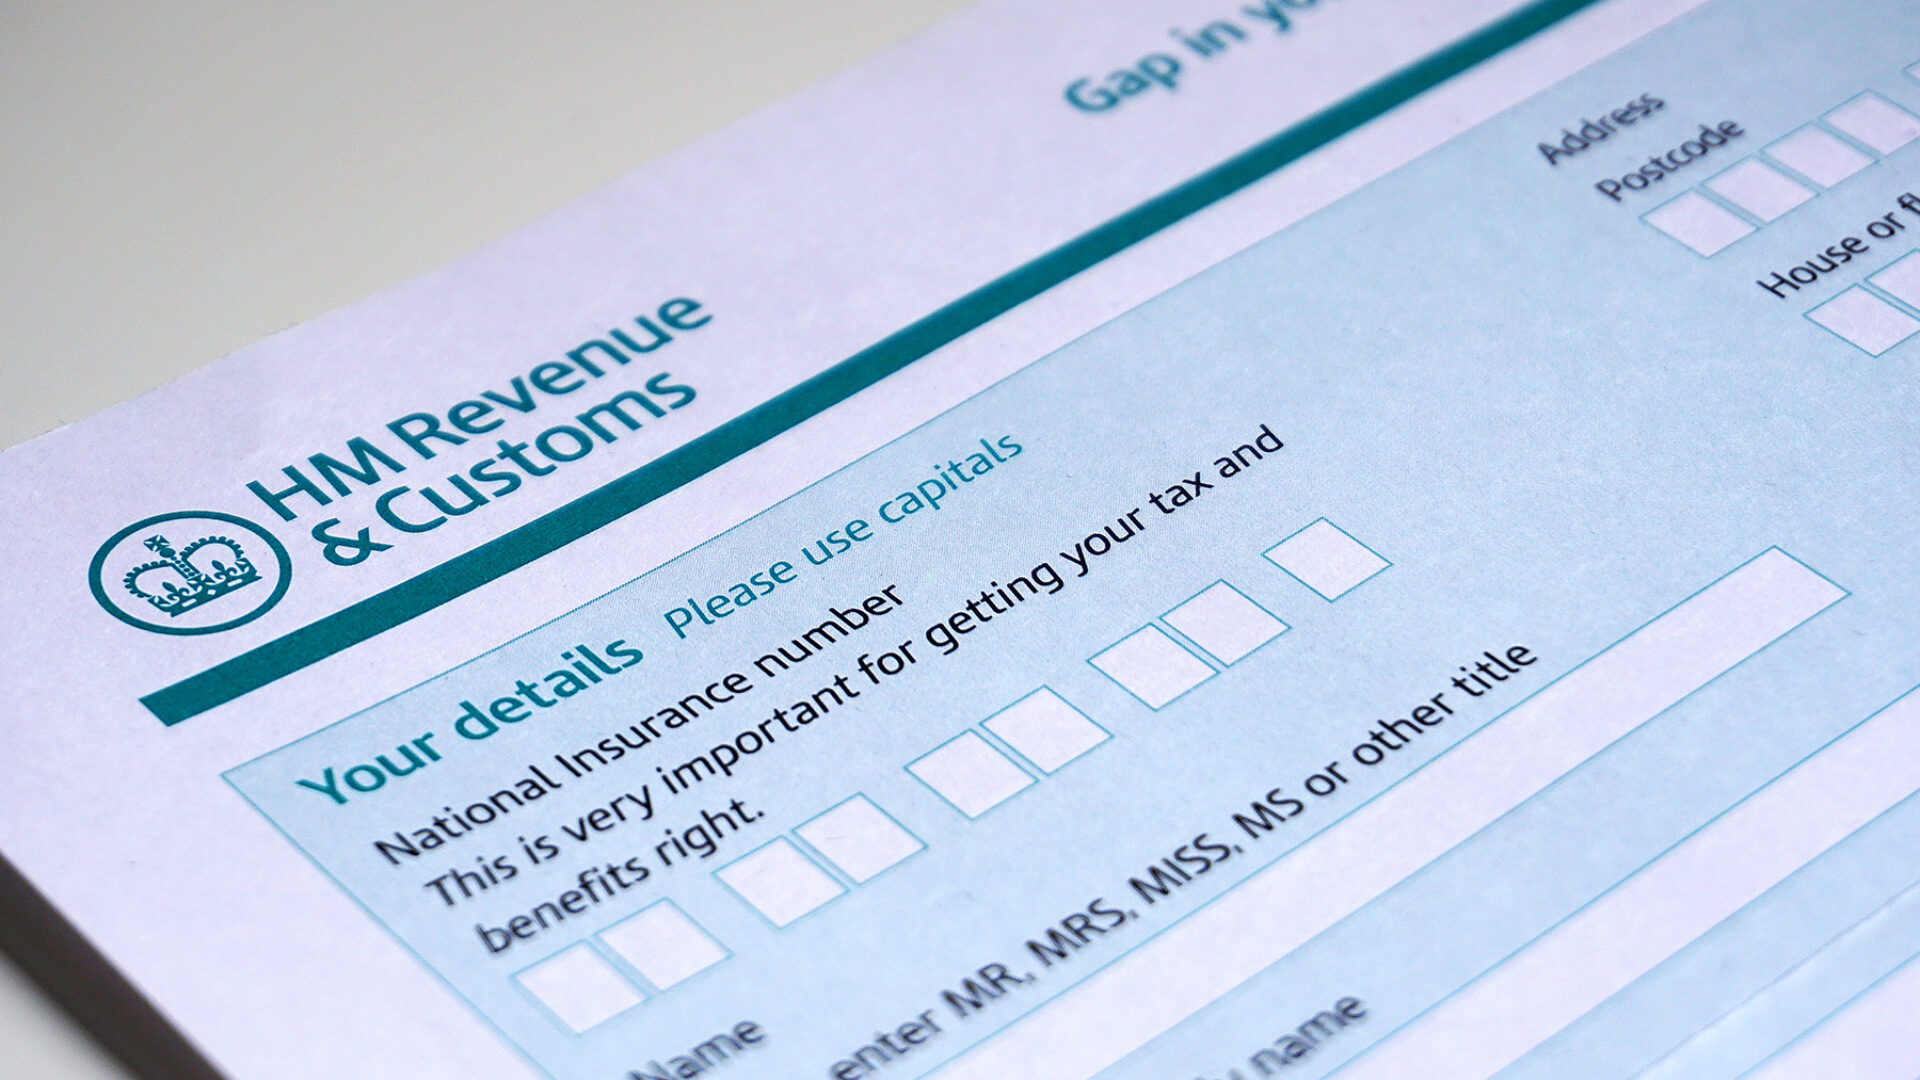 Hmrc Self Employed Tax Return Contact Number